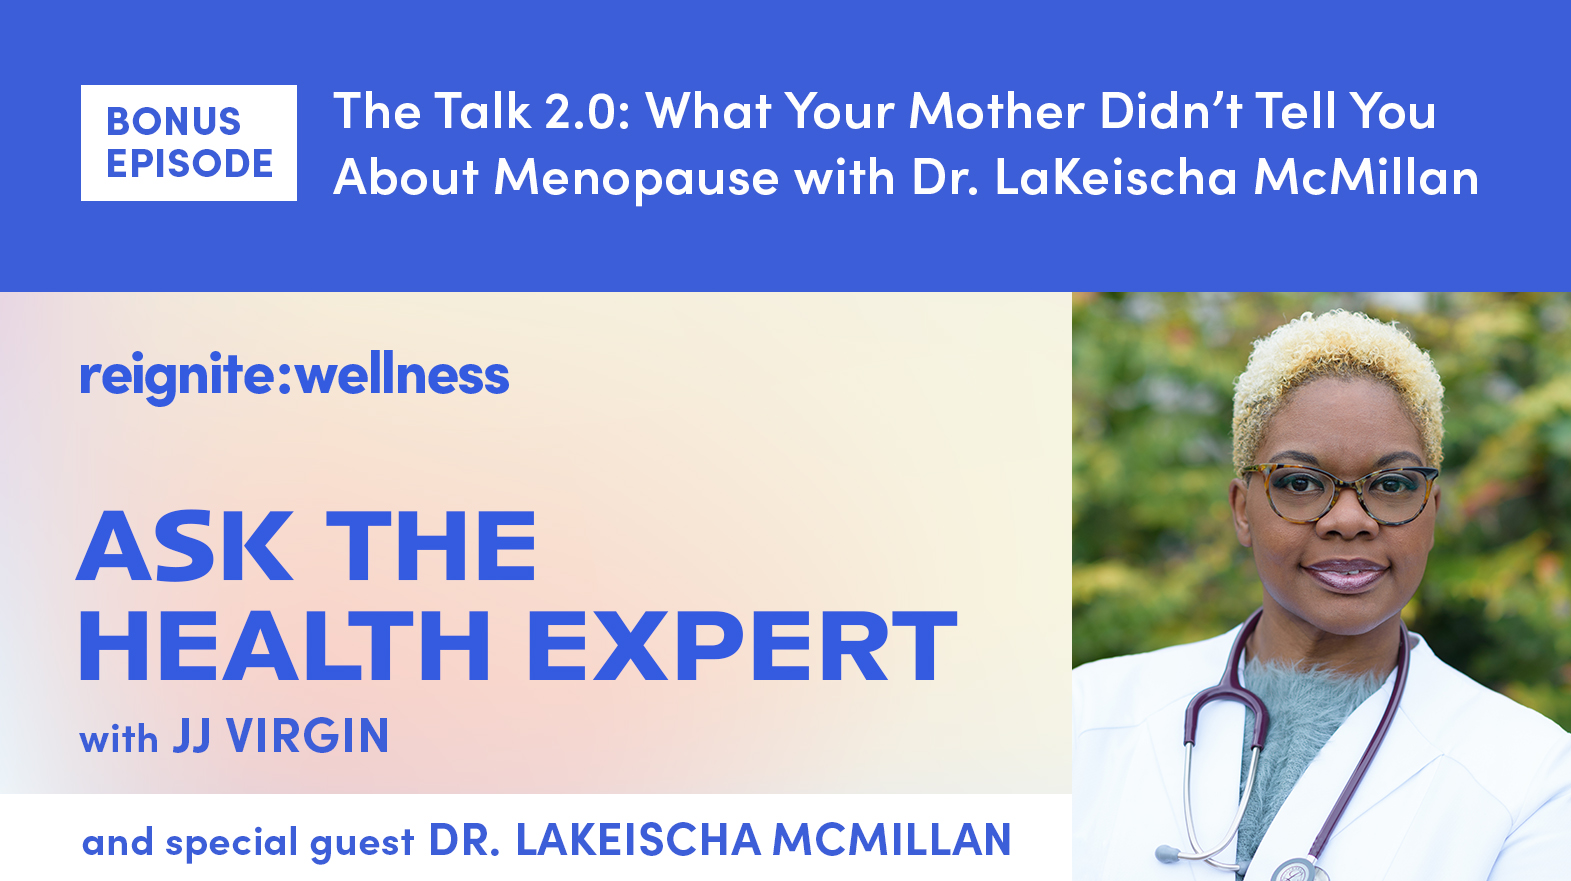 Bleeding After Menopause. Don't Wait to See Your Doctor - McLeod Health